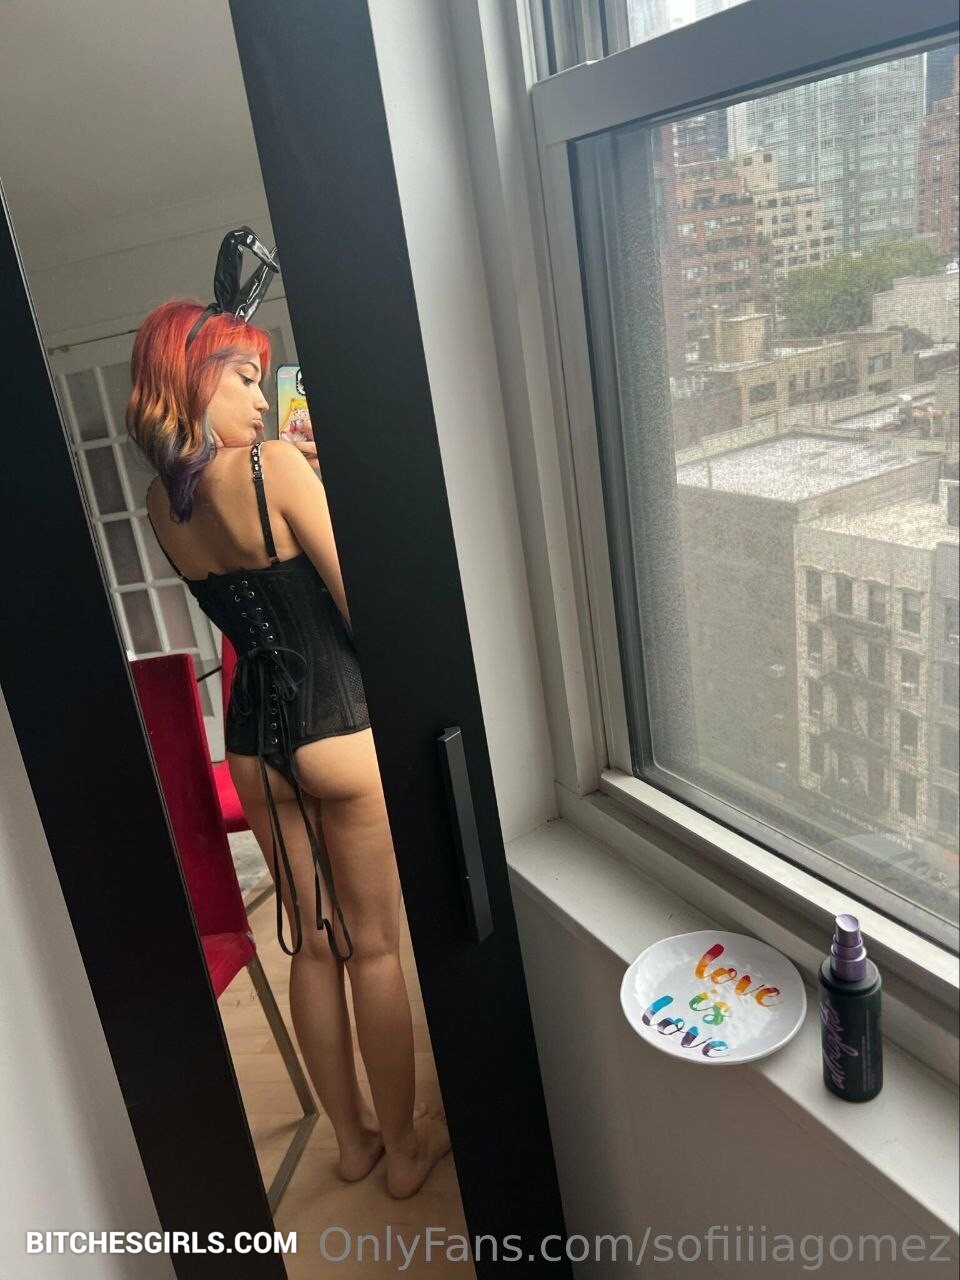 Explore the scandalous world of influencer Sofia Gomez's exclusive OnlyFans content, including her latest leaked photos and videos. From teasing on TikTok to adult photoshoots, you can find more of Sofia's explicit content on leakwiki. Discover her naughty side and see why she's gone viral on gonewild. Can you handle the heat of Sofia Gomez's wild and sultry online presence? Unlock the secrets of this 18+ sensation and find out everything you need to know about the mysterious Gomez.